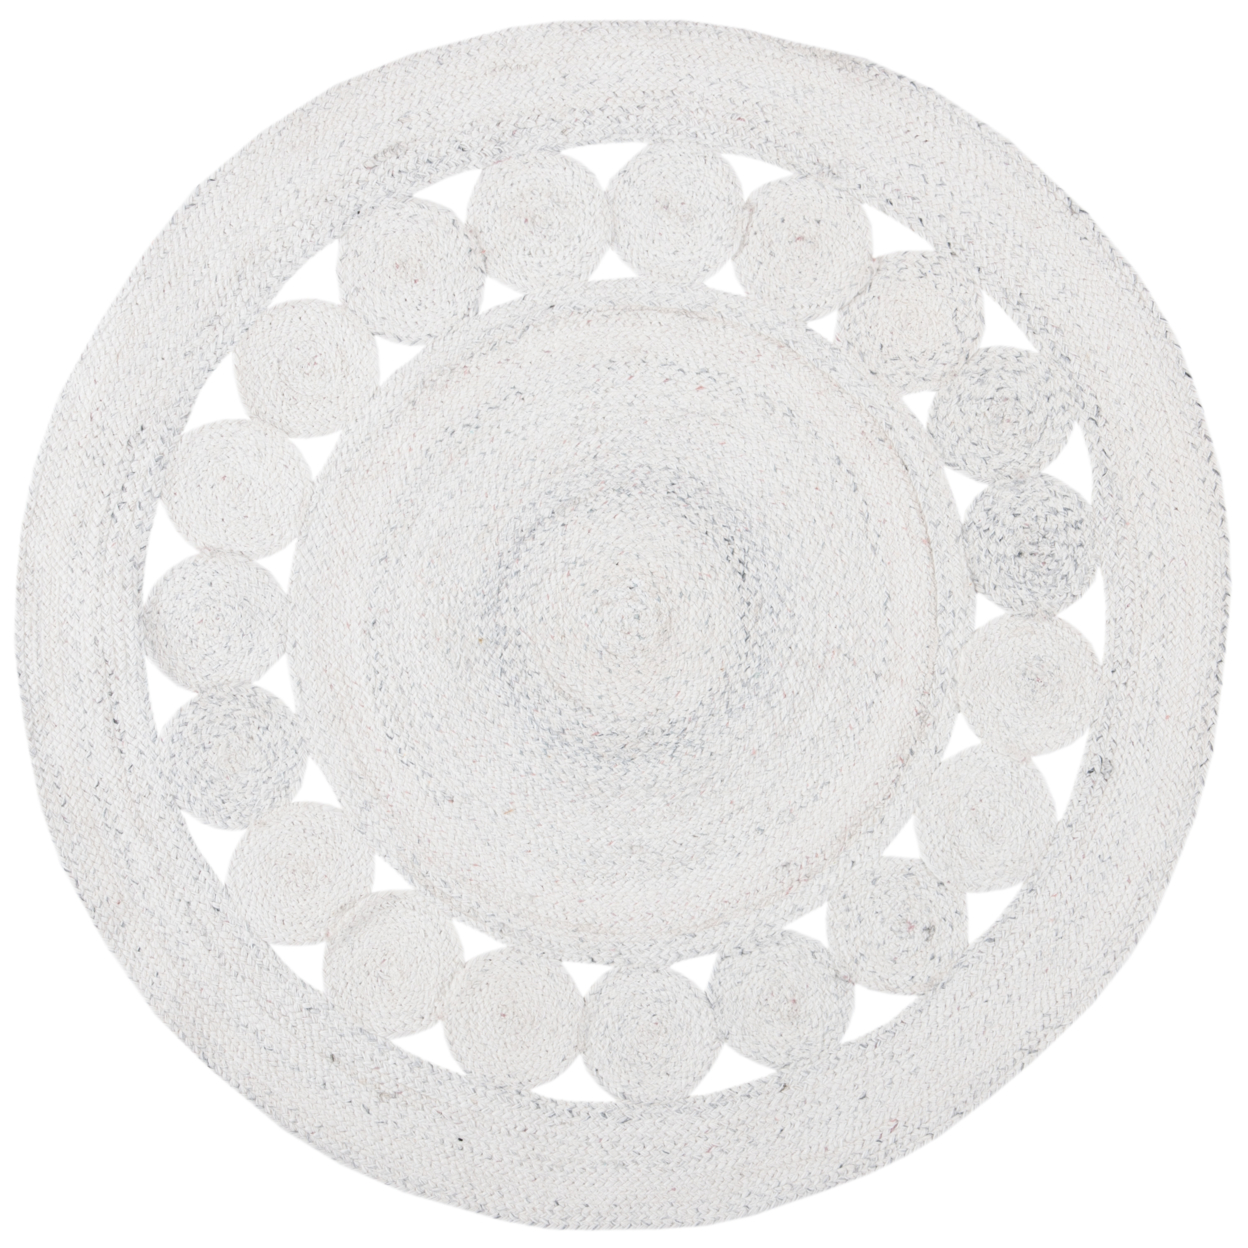 SAFAVIEH Cape Cod Collection CAP225A Handwoven Ivory Rug - 4' Round